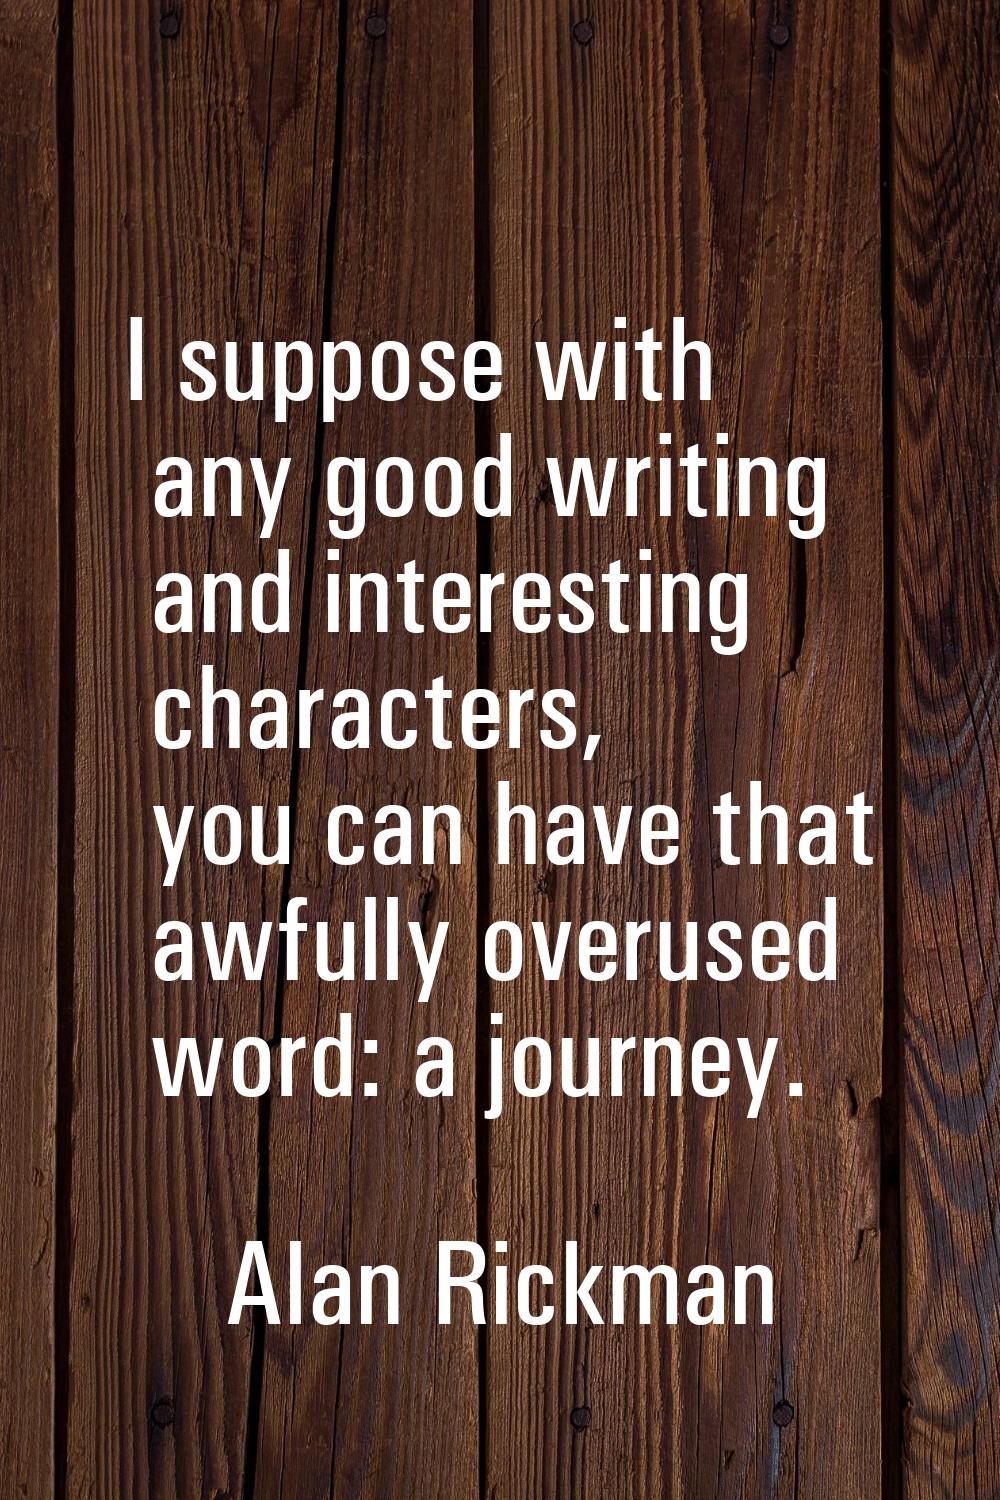 I suppose with any good writing and interesting characters, you can have that awfully overused word